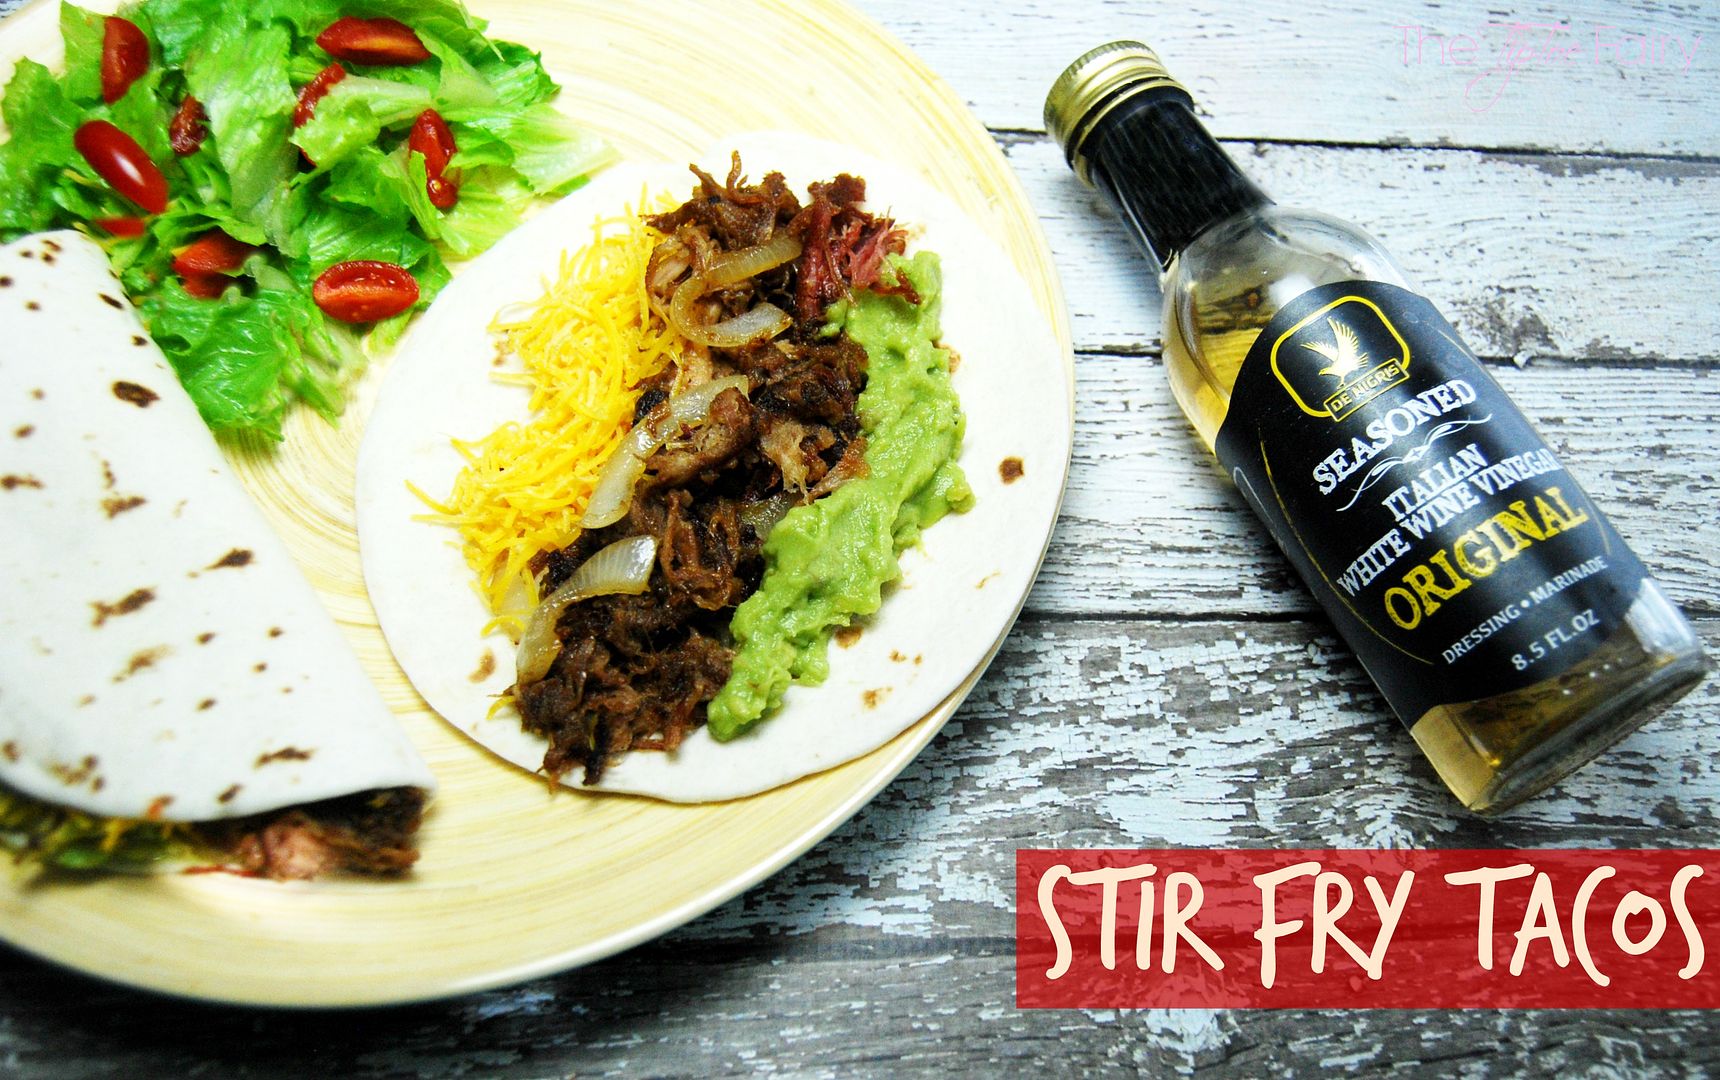 A fusion of Asian and Mexican flavors with Stir Fry Tacos | The TipToe Fairy #lovemyvinegar #shop 